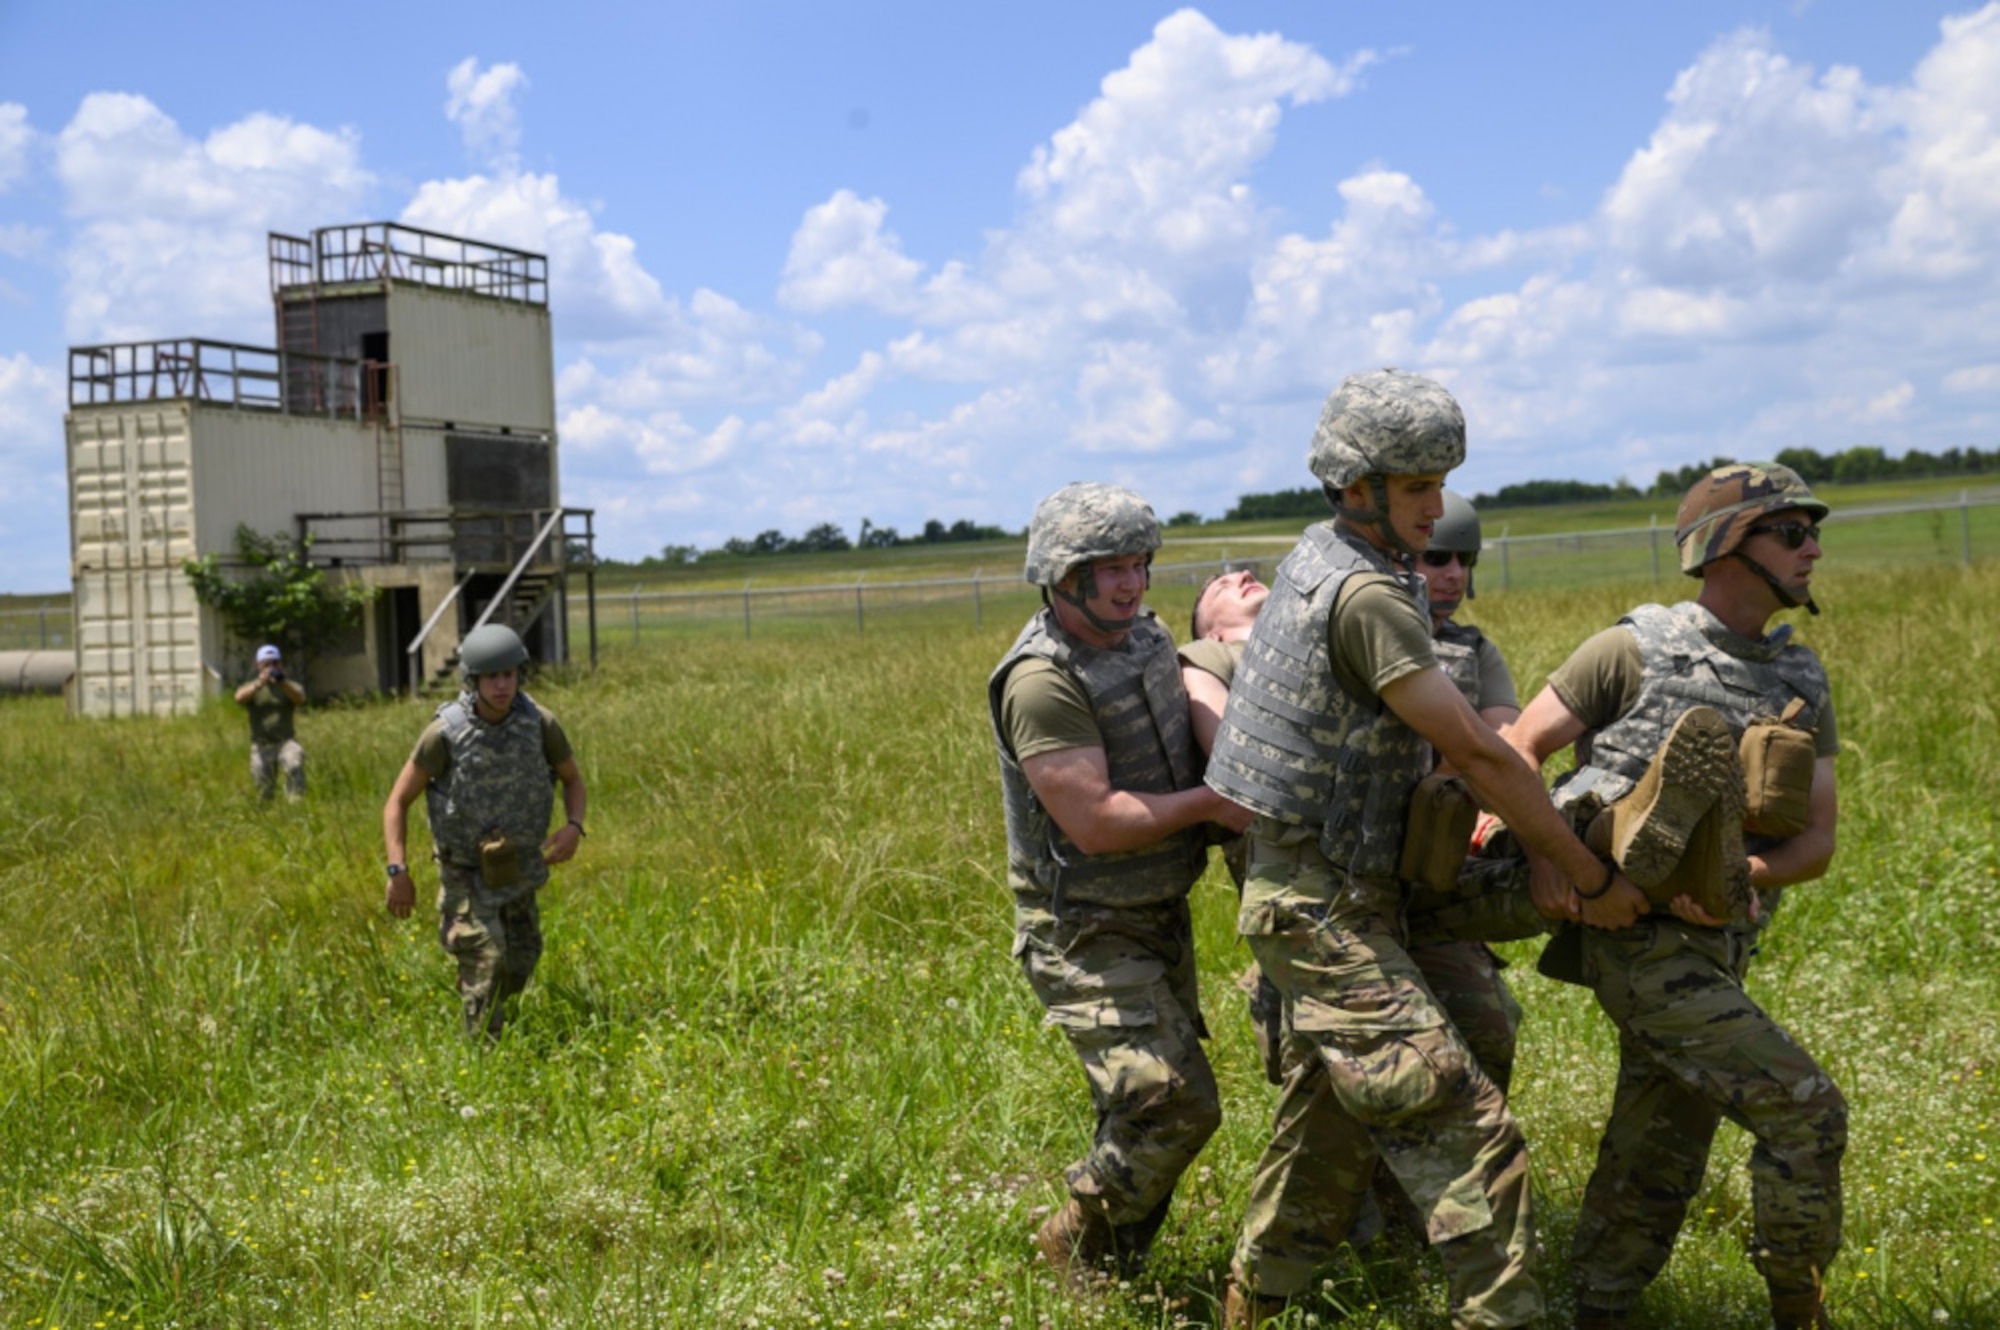 Airmen from the 188th Wing completed an intensive two-day course here, June 3 – 4, 2021.  The training involved airway management, tourniquet application, wound bandaging, and various stretcher-carrying techniques